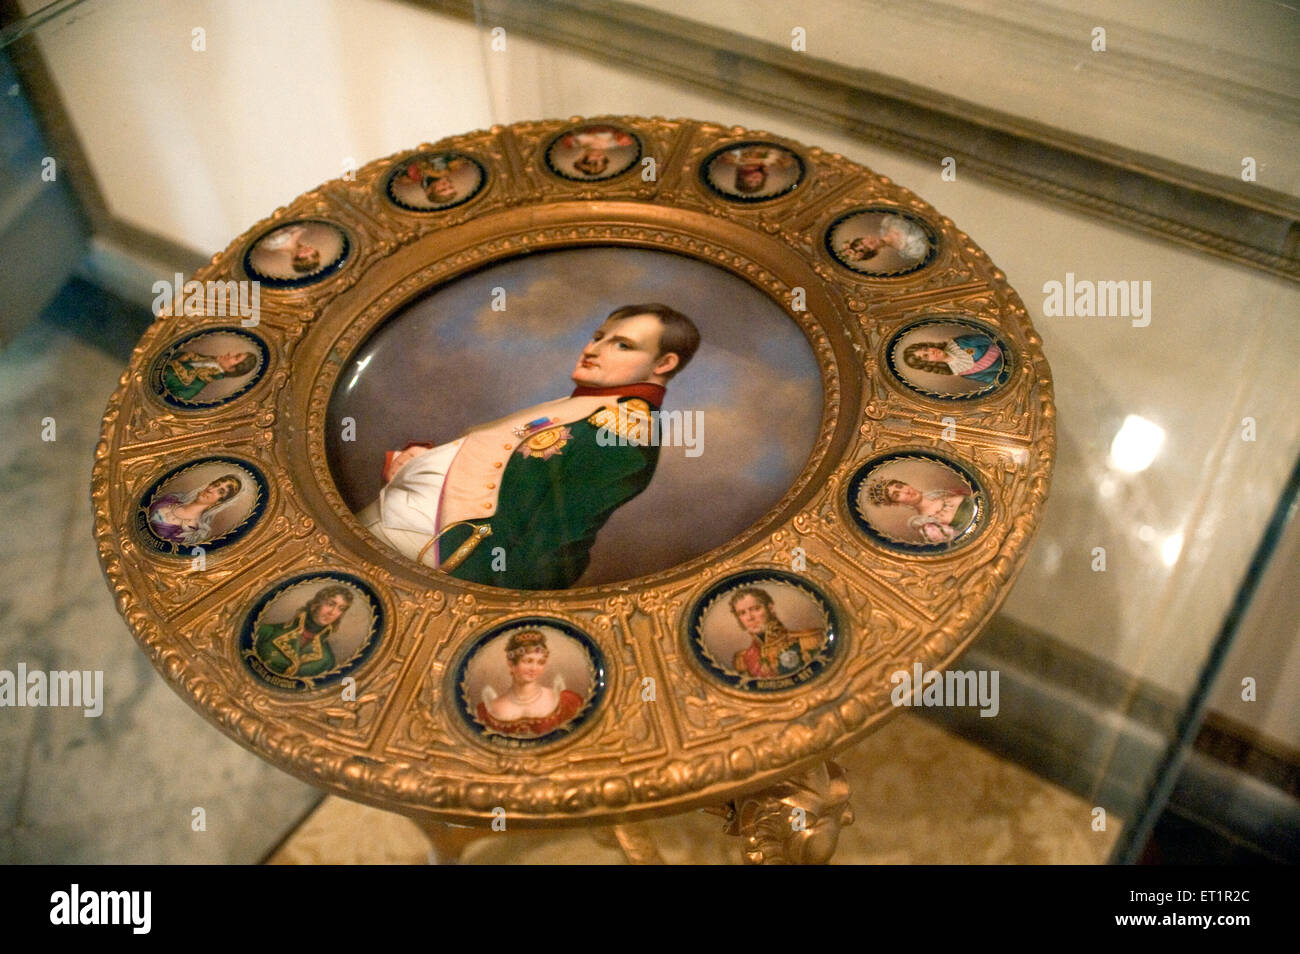 Napoleon painting on disk in scindia museum in jaivilas palace ; Gwalior ; Madhya Pradesh ; India Stock Photo